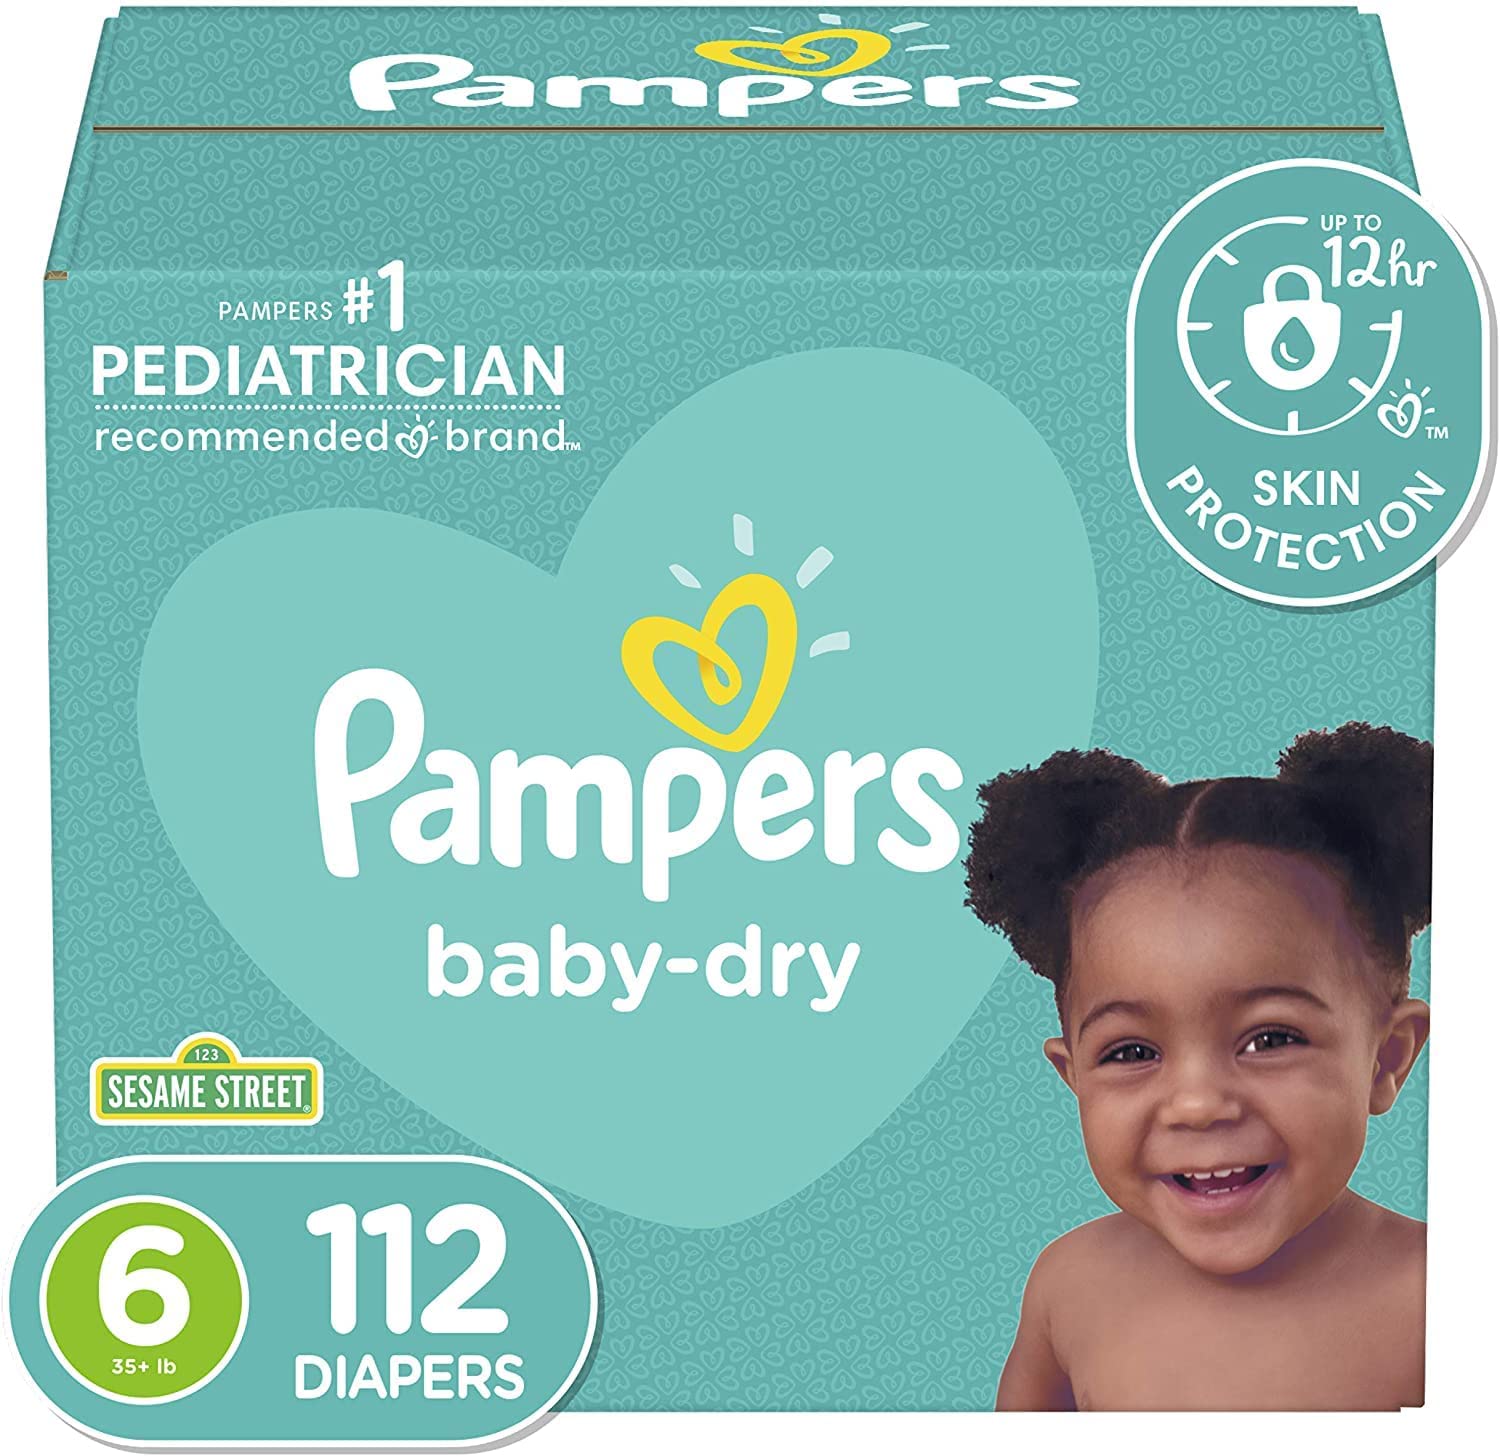  Diapers Size 4, 150 Count - Pampers Pure Protection Disposable  Baby Diapers, Hypoallergenic and Unscented Protection (Packaging & Prints  May Vary) : Baby